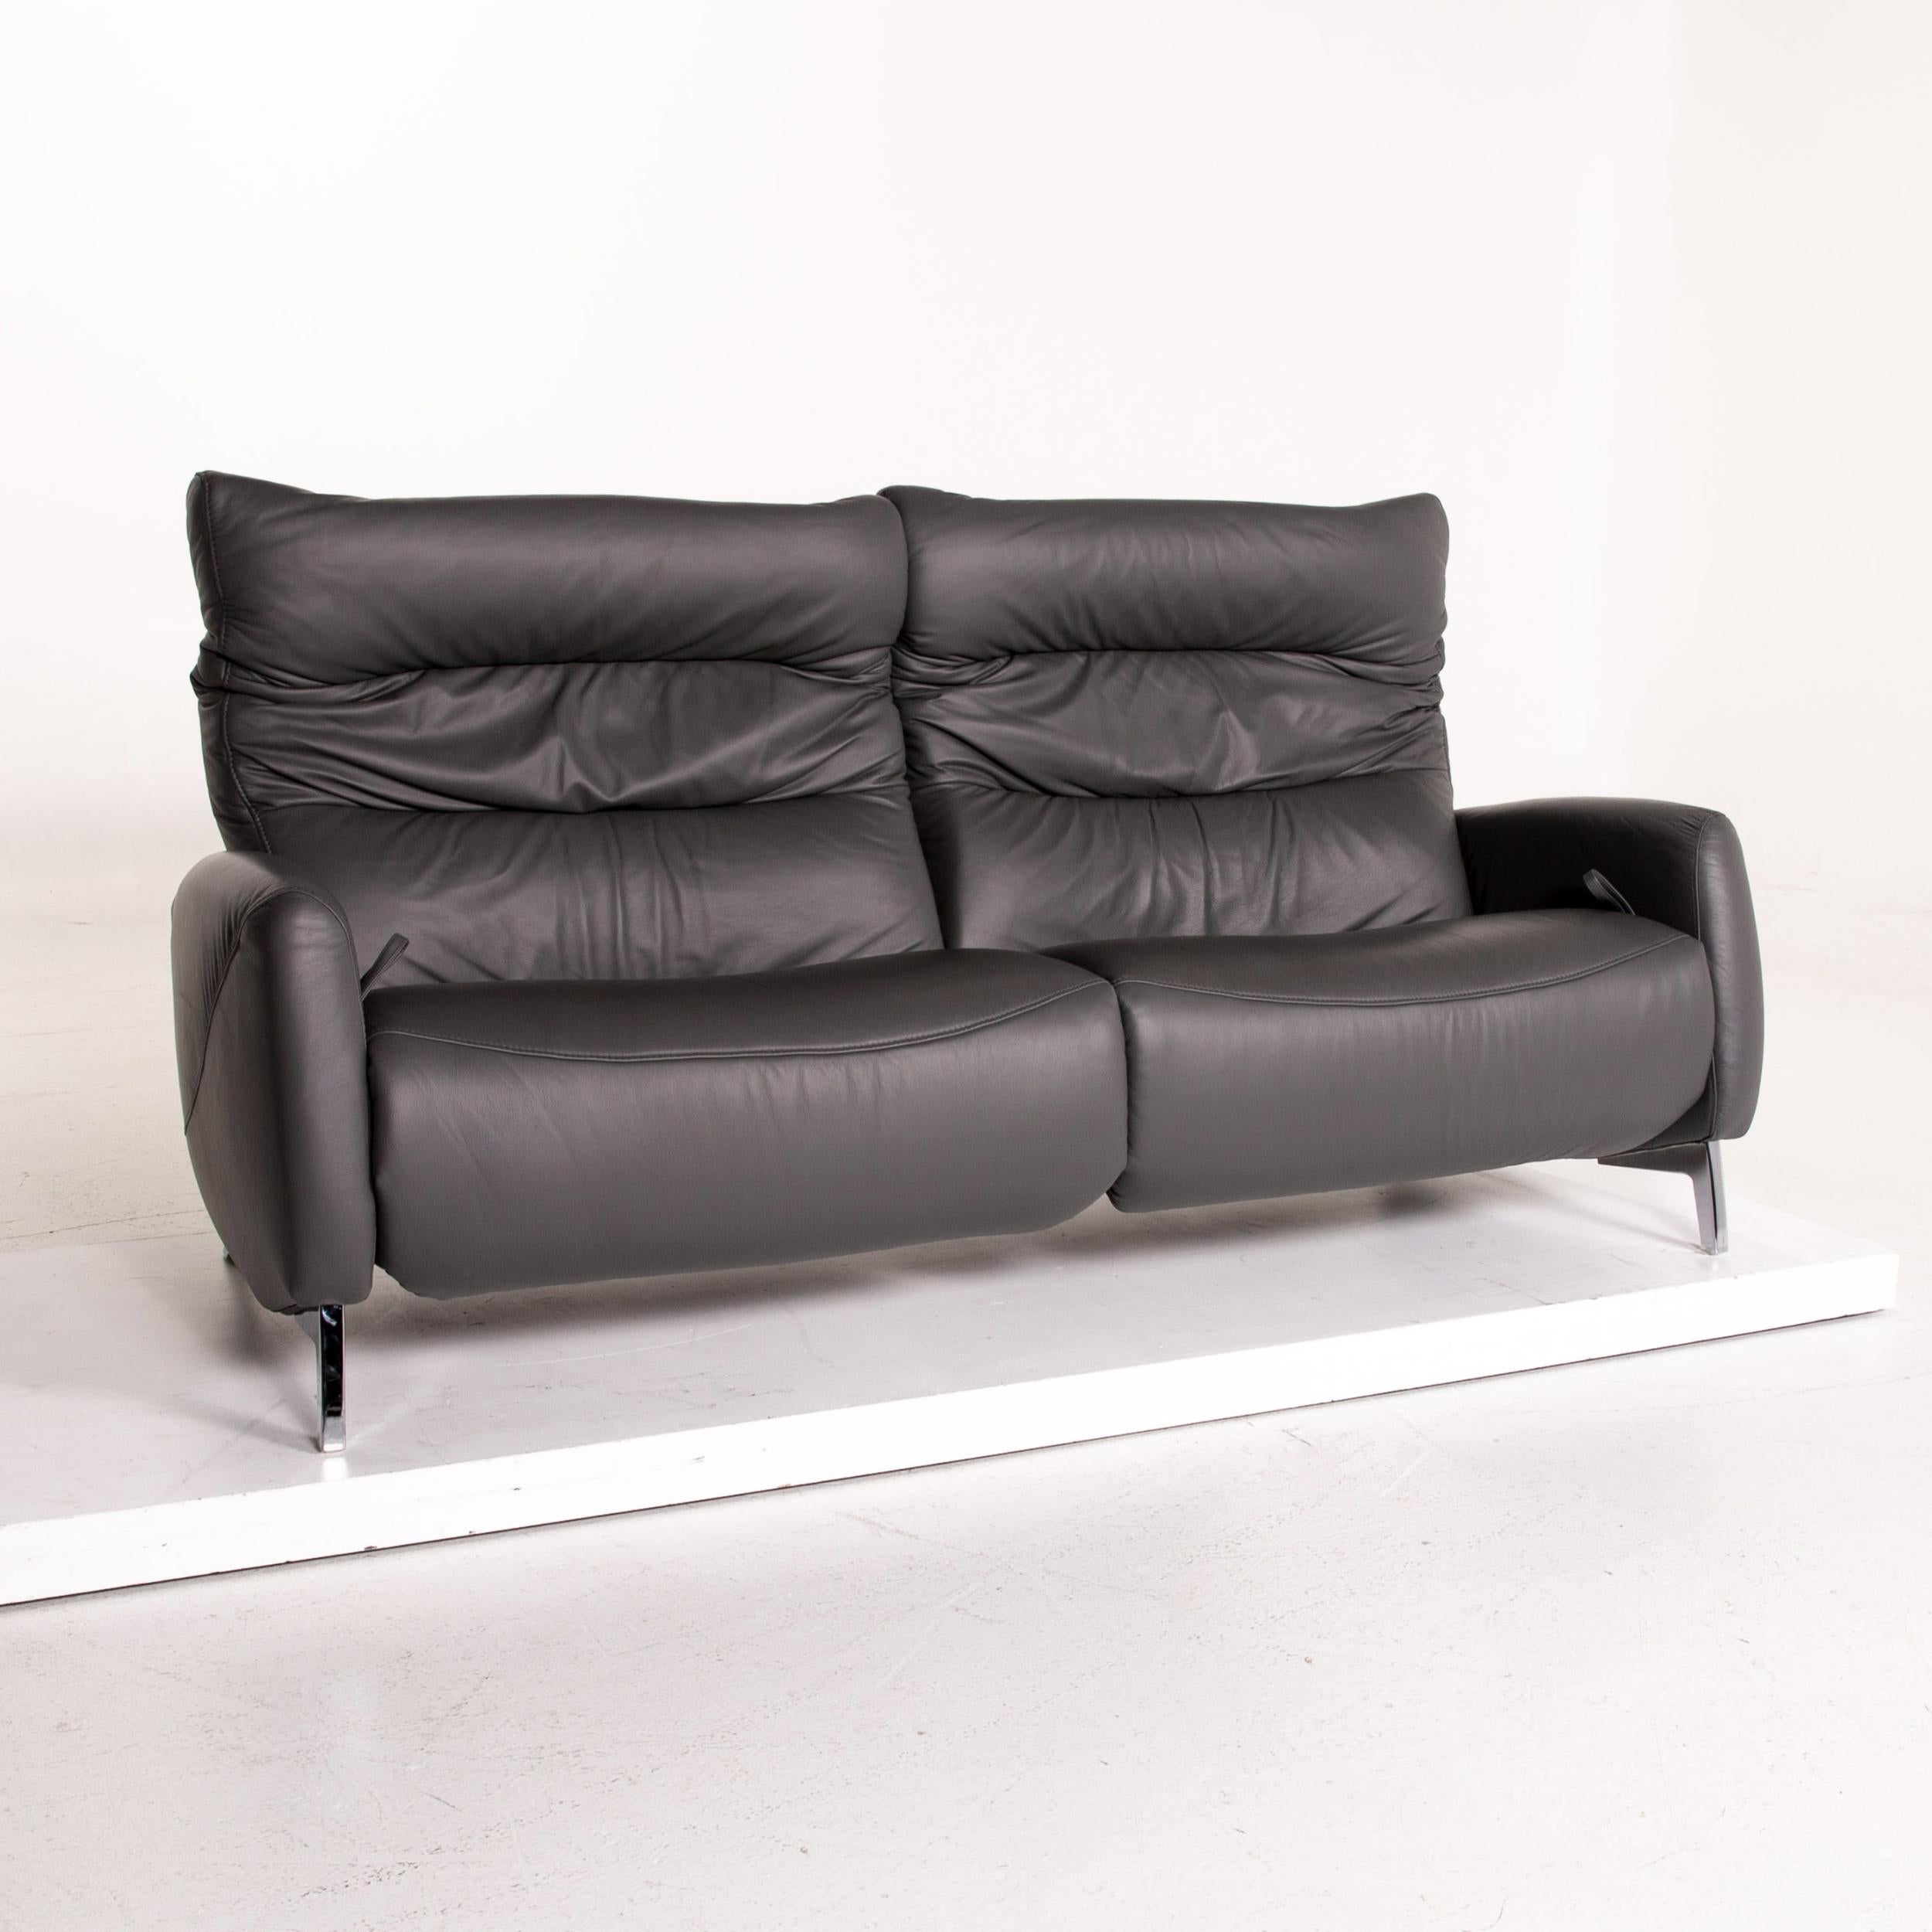 Mondo Recero Leather Sofa Gray Two-Seat Function Relax Function Couch 6